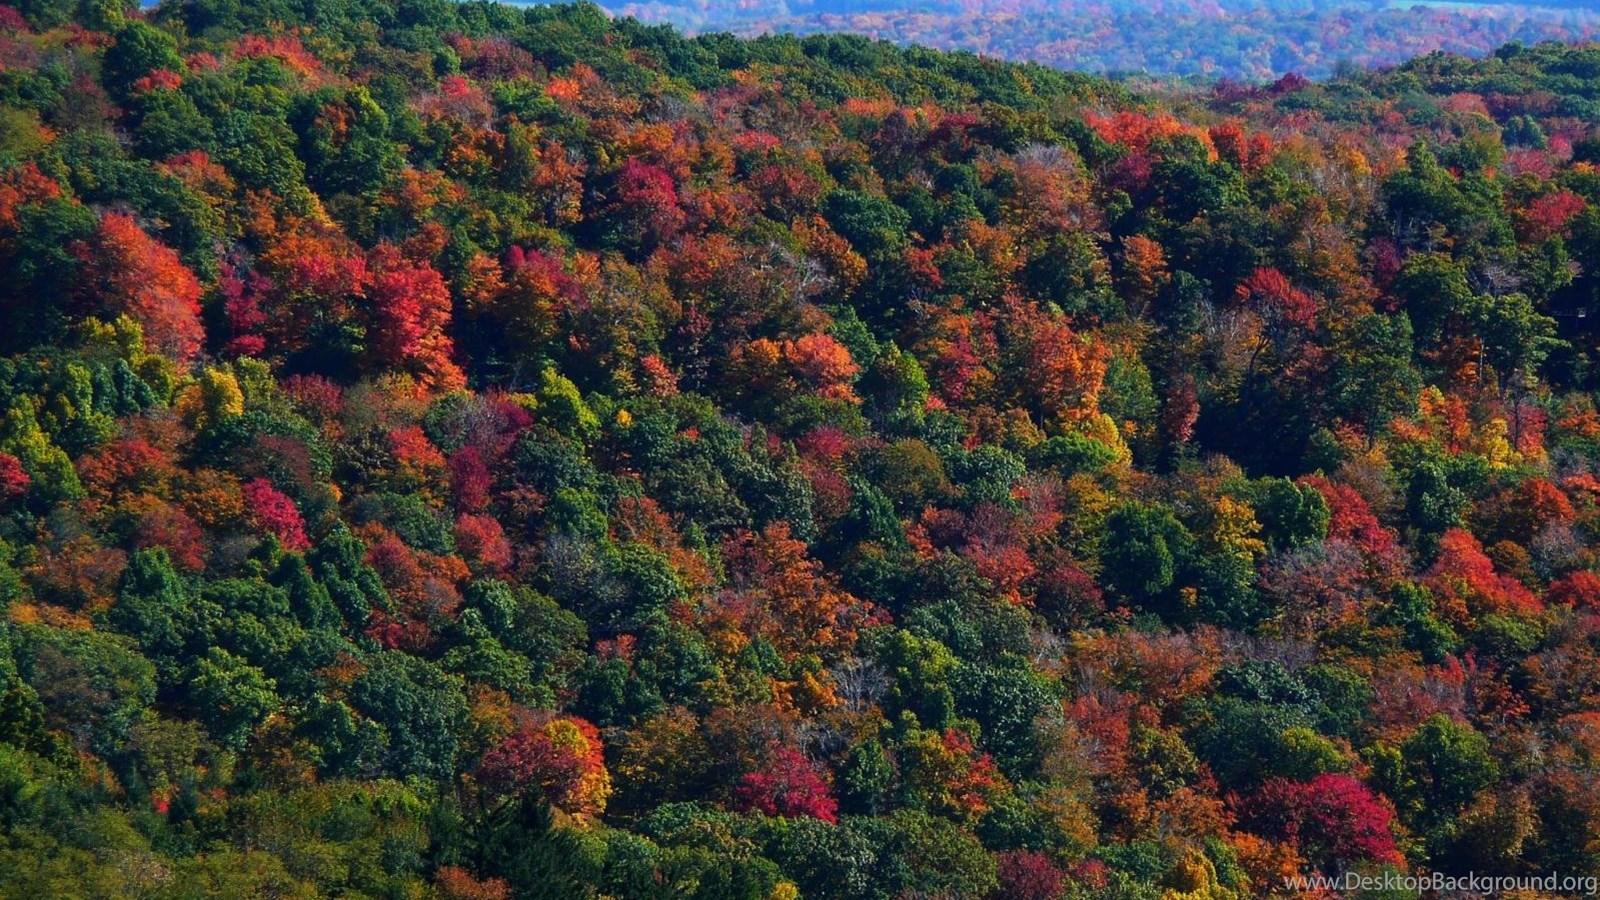 MLeWallpapers Appalachian Mountains In Fall Desk 4K Backgrounds